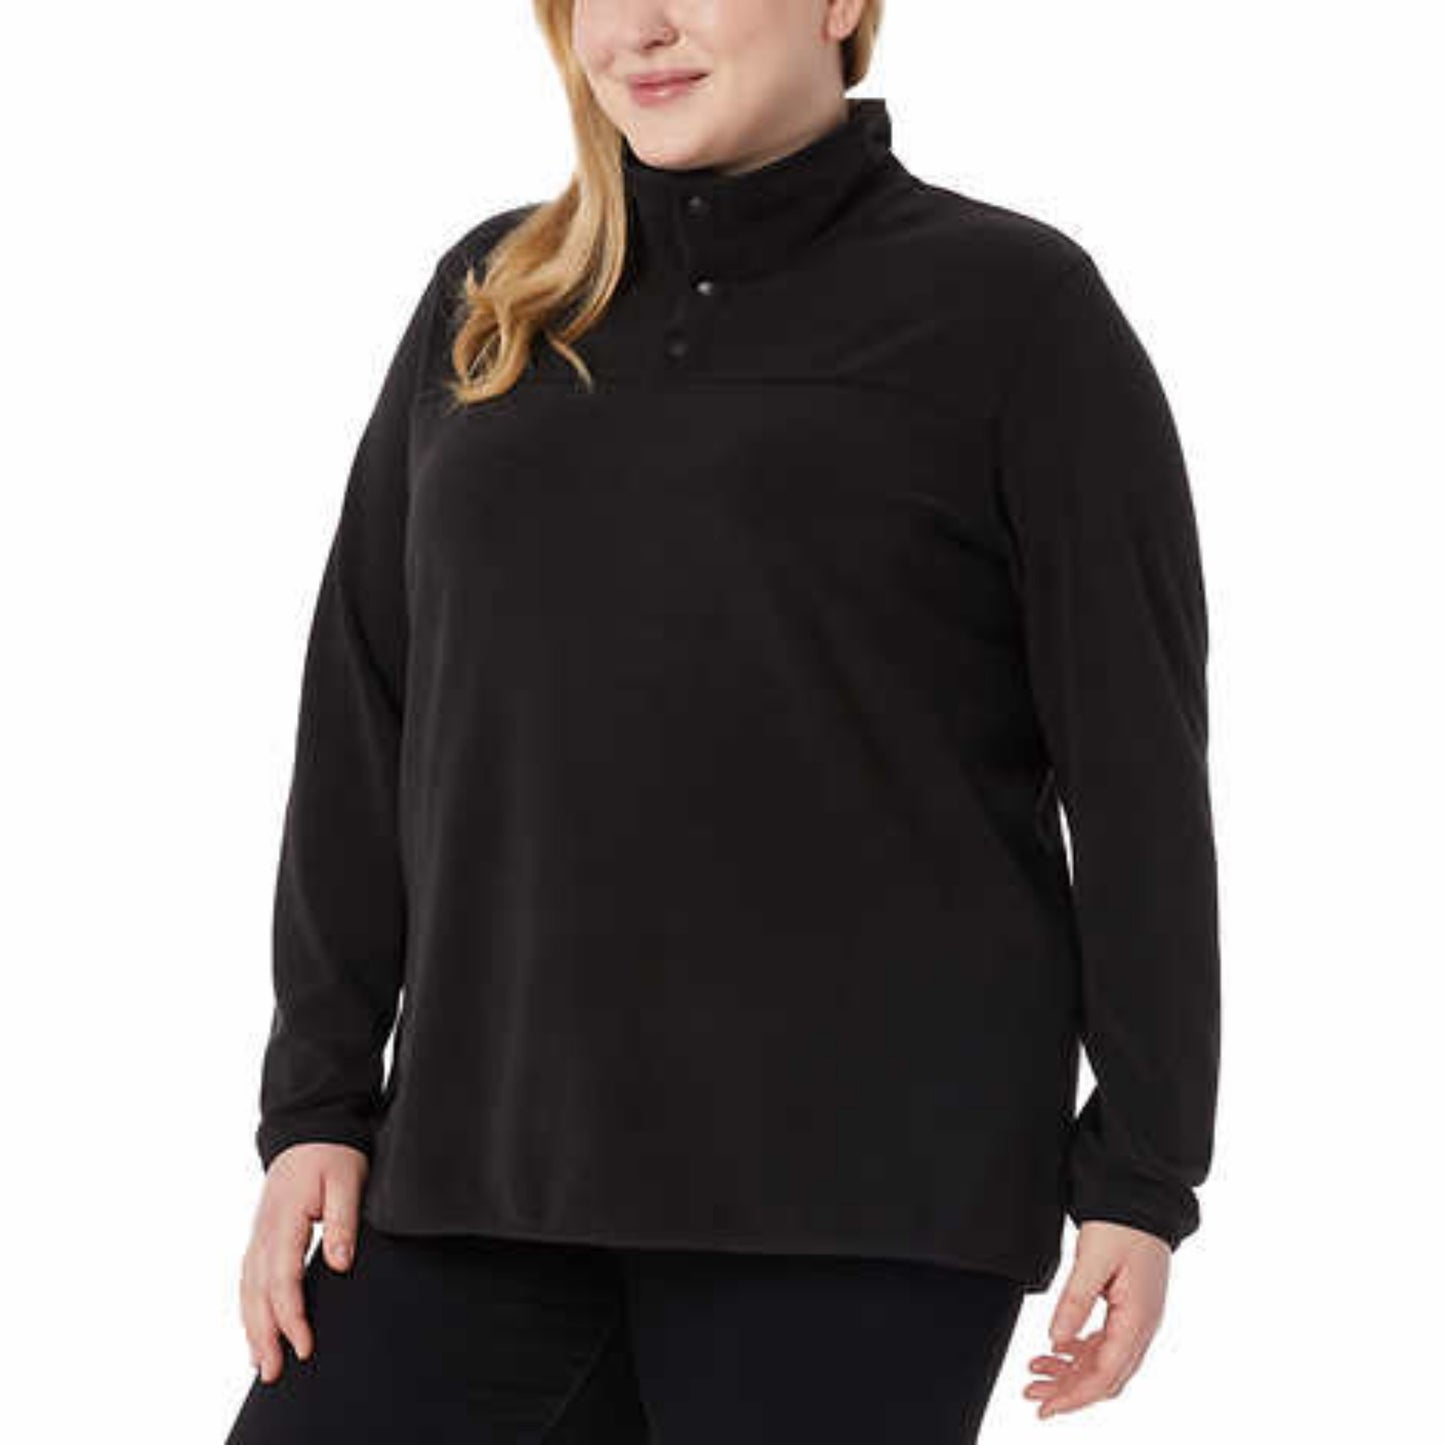 32 Degrees Snap Arctic Soft Fleece Midweight Pullover Top